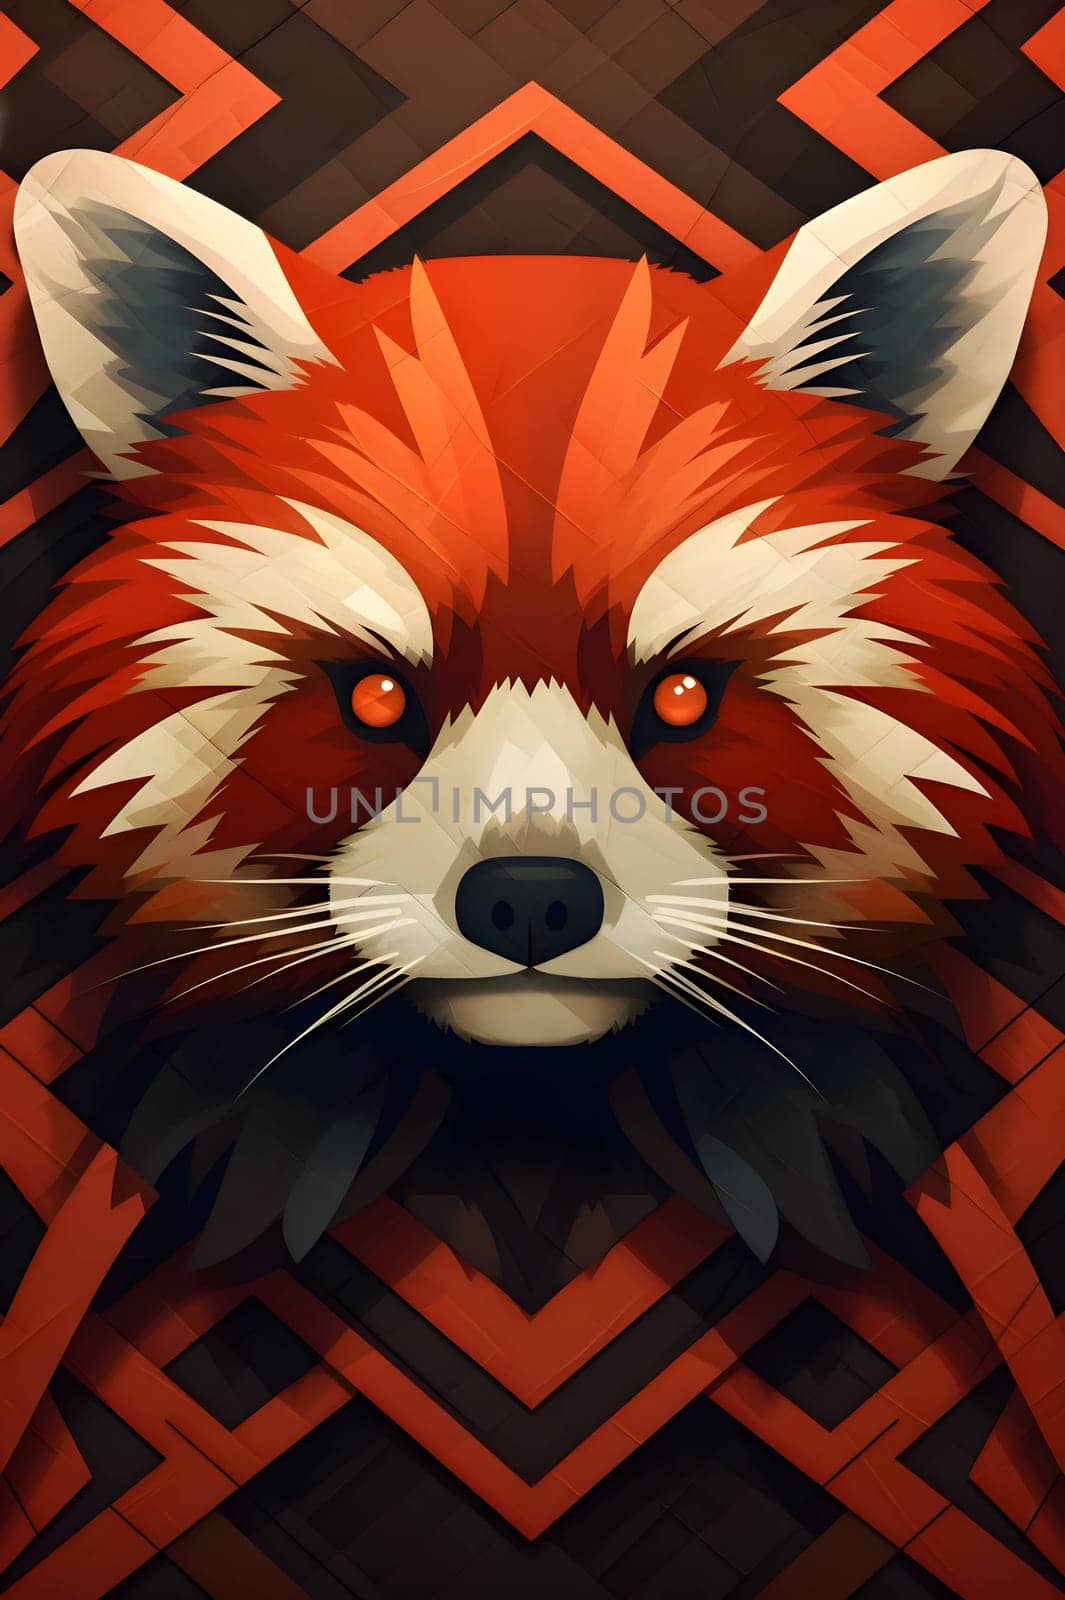 Abstract illustration: Red panda portrait on a background of geometric patterns. Vector illustration.